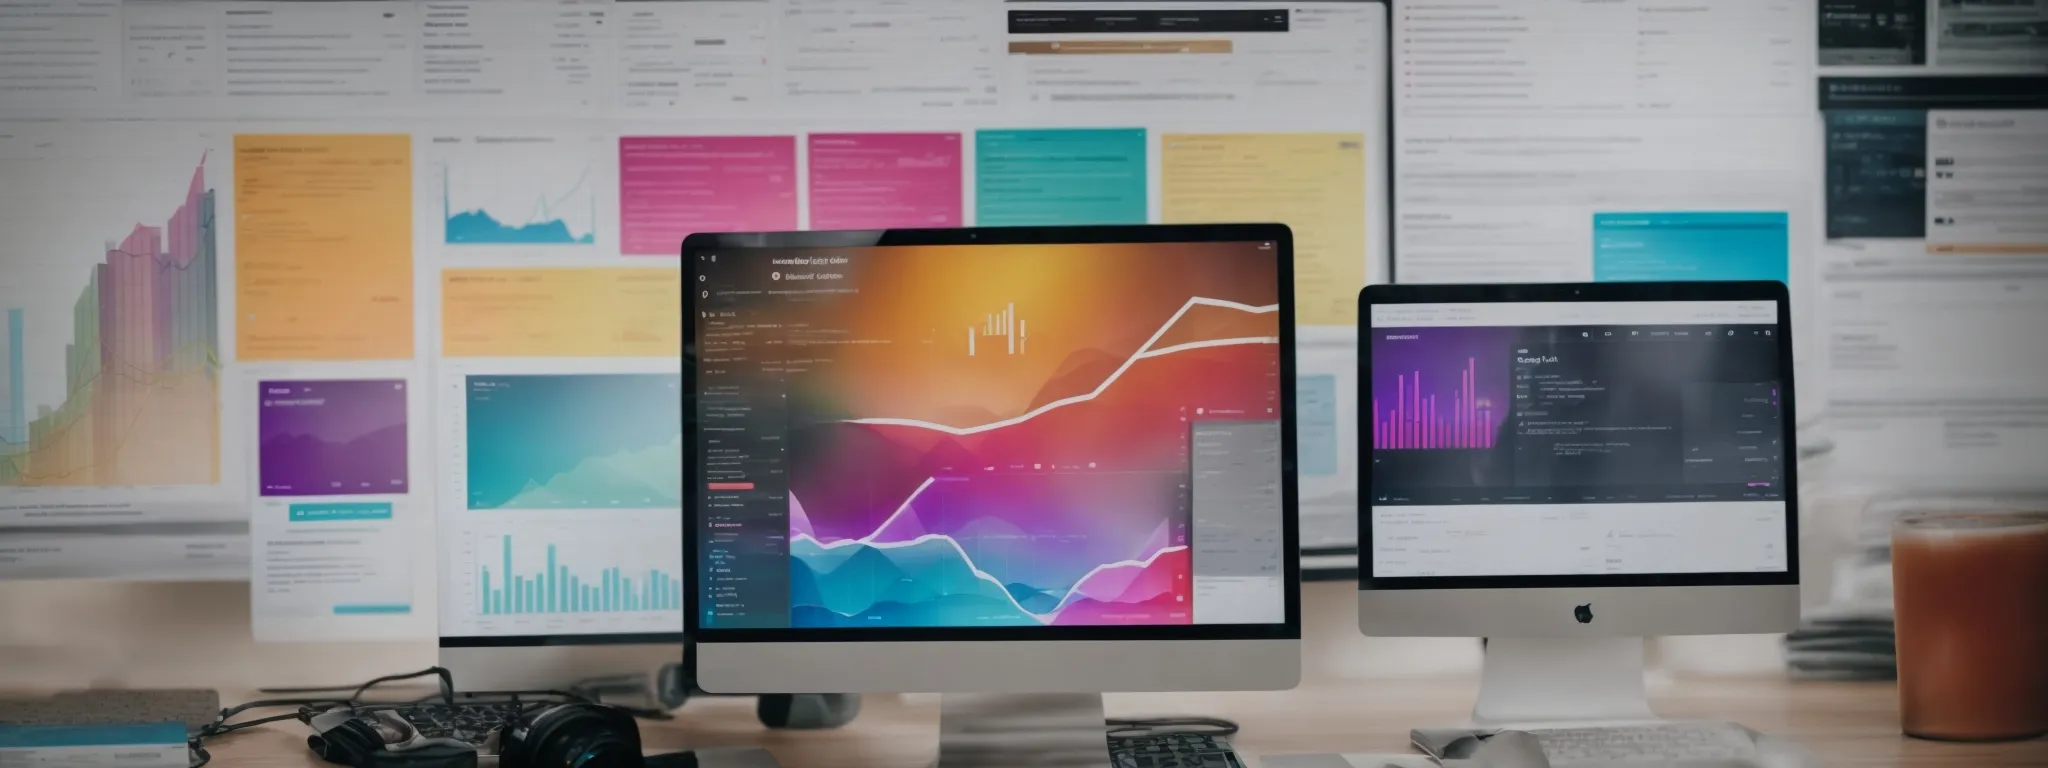 a desktop with an open laptop displaying a colorful analytics dashboard, surrounded by notes on seo strategies.